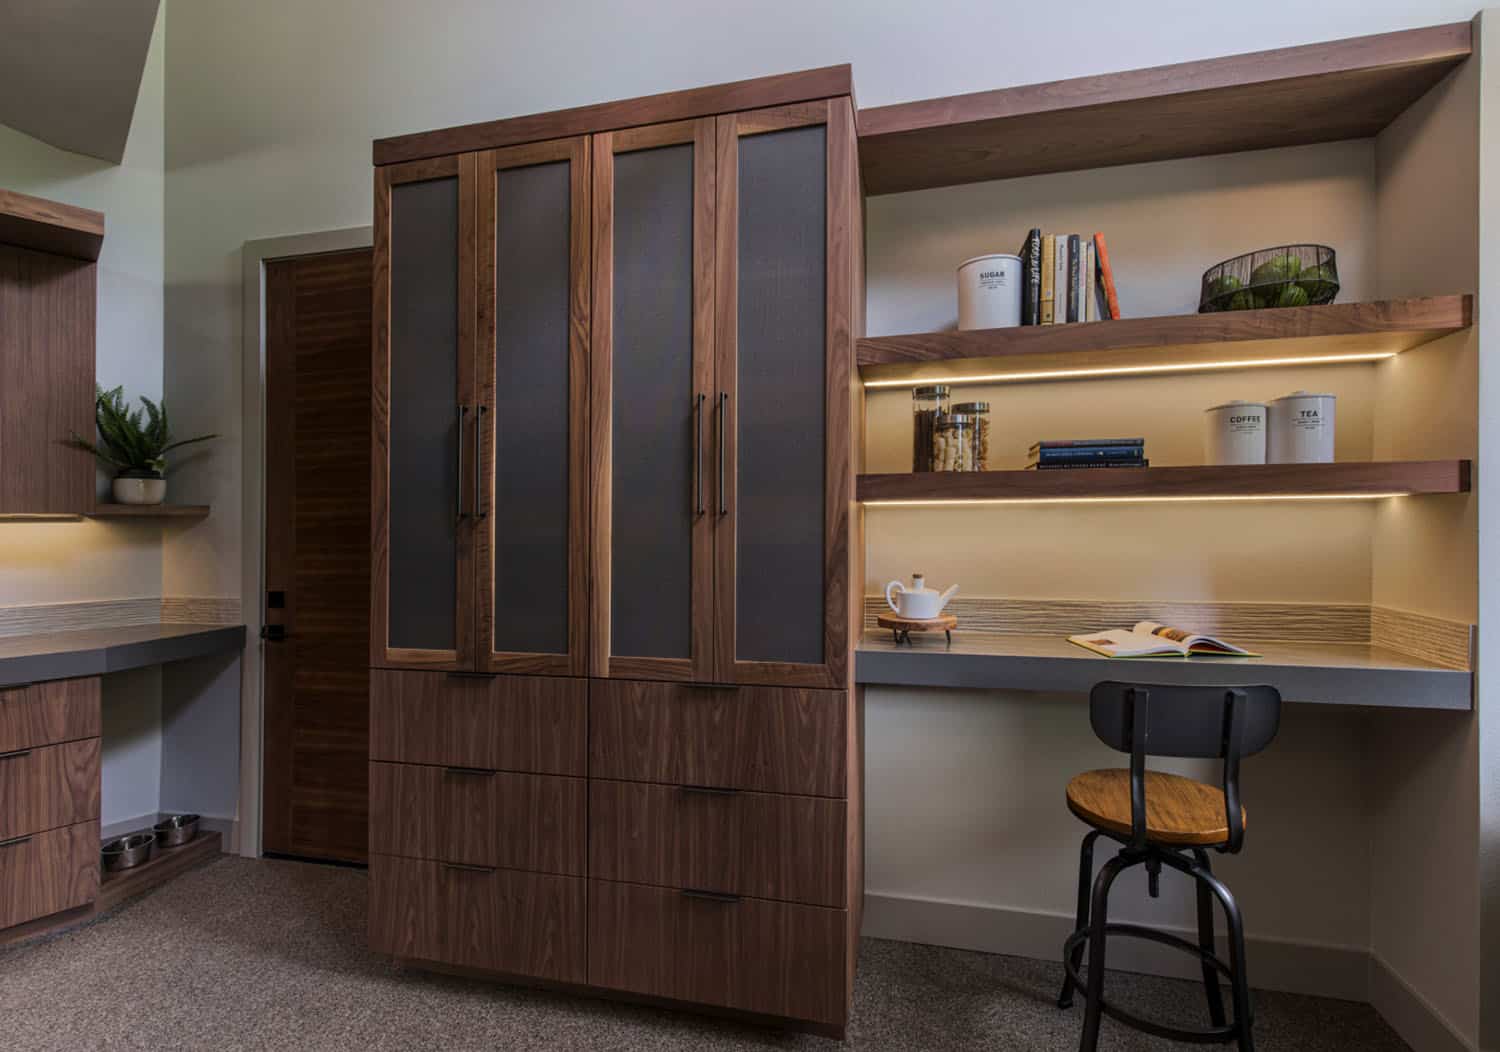 contemporary-kitchen-pantry